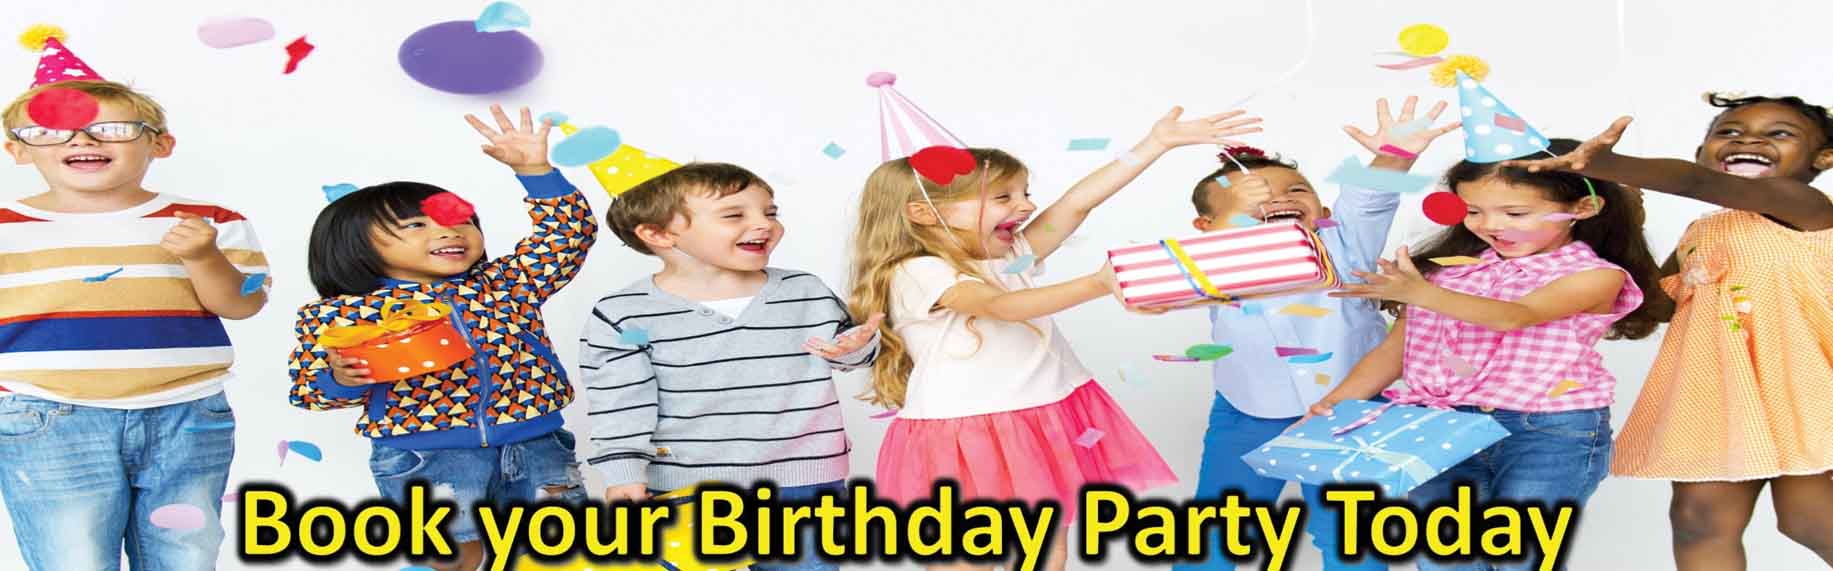 jumper places for birthday parties